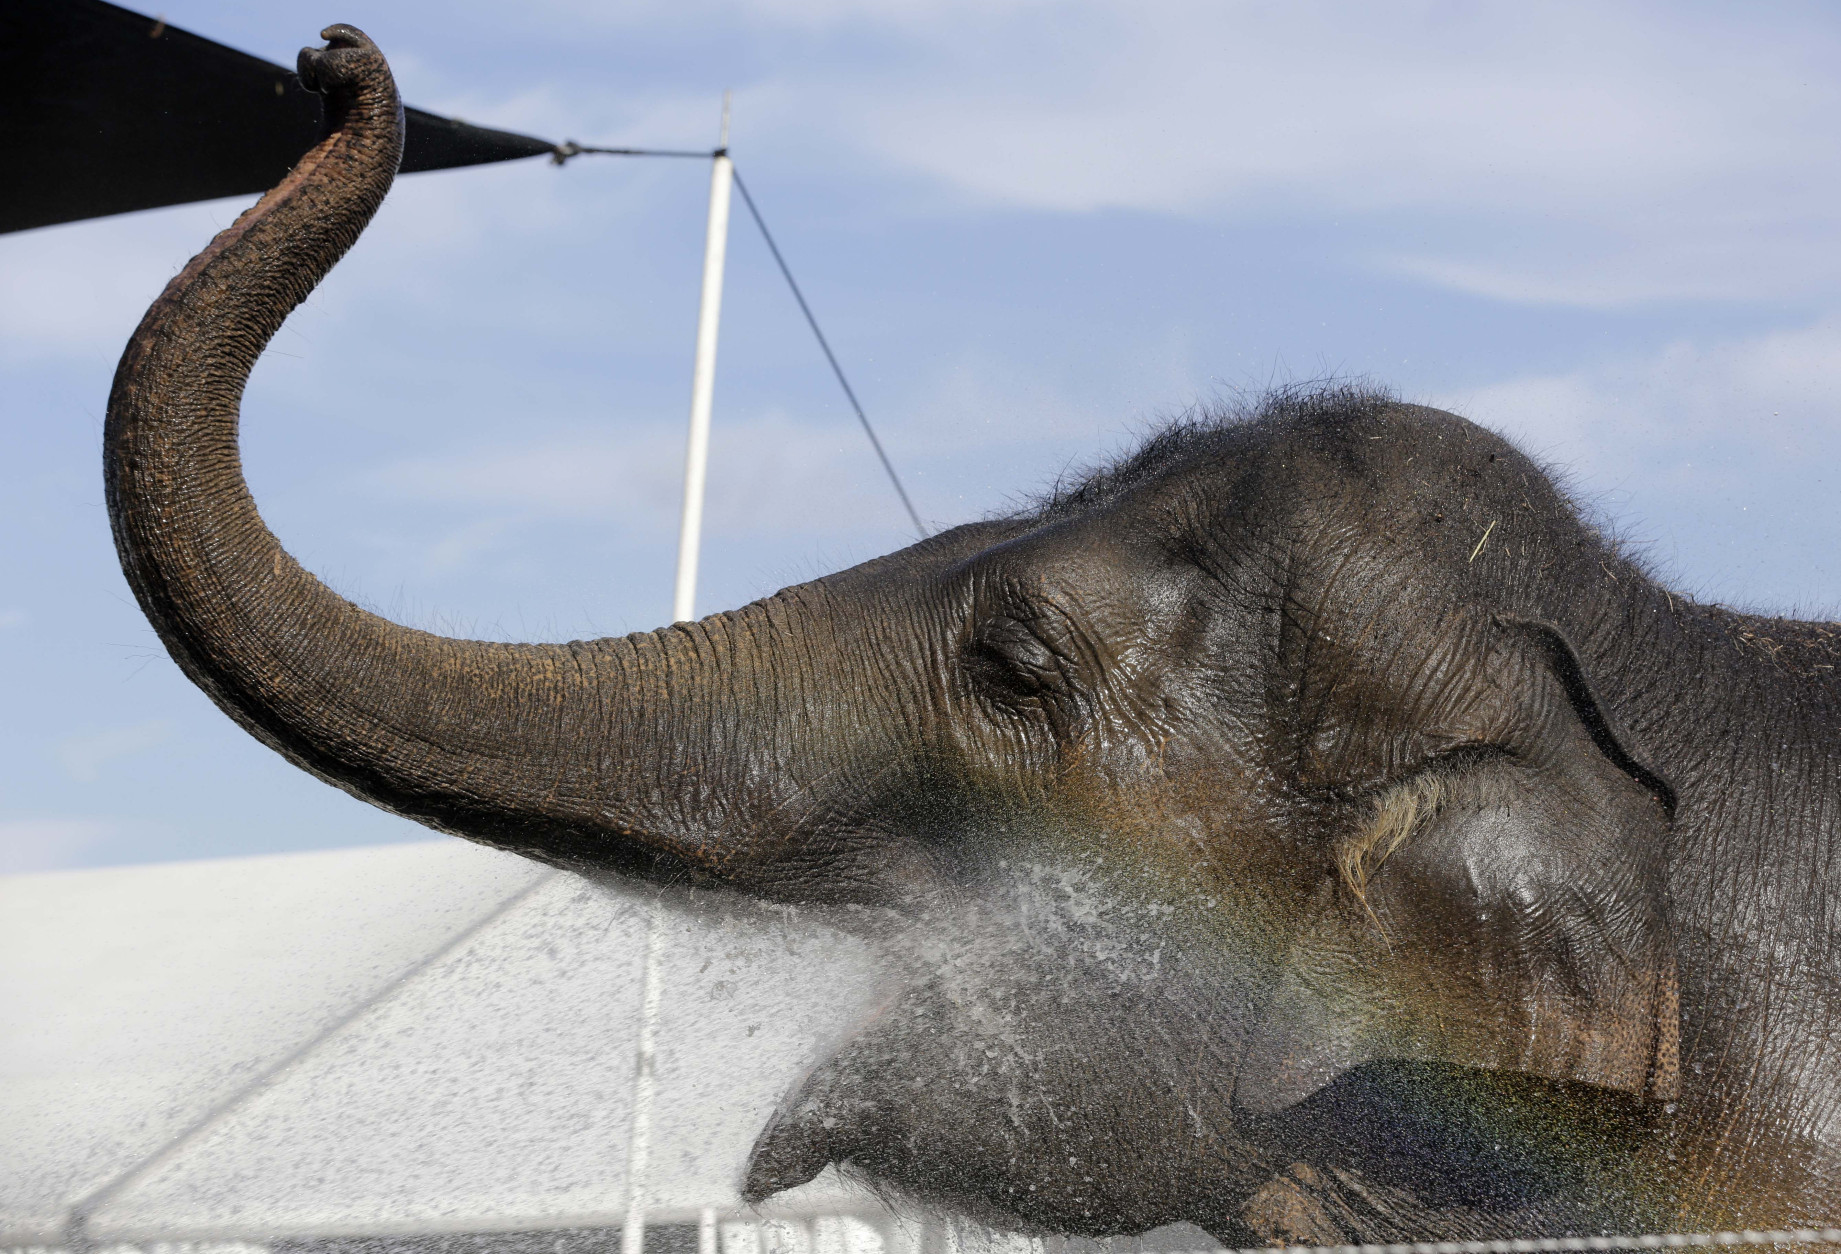 An elephant gets a bath outside of a tent where they are housed during a media preview of the Ringling Brothers and Barnum &amp; Bailey Circus, Friday, Jan. 9, 2015, in Miami. The circus runs from Jan 9-20 at American Airlines Arena in Miami. (AP Photo/Lynne Sladky)